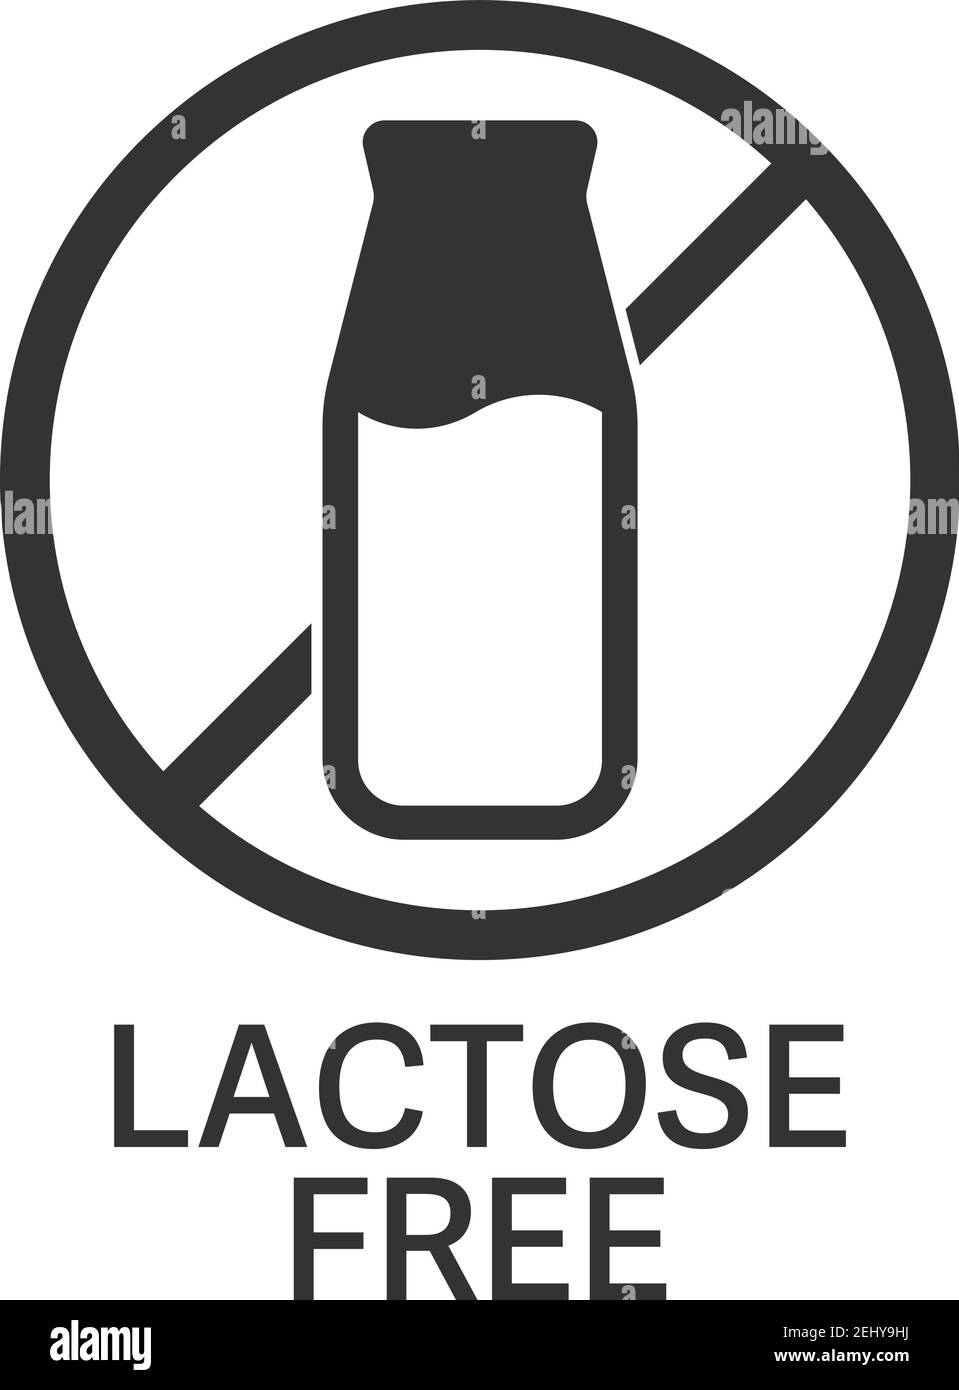 lactose free symbol or label with milk bottle vector illustration Stock Vector